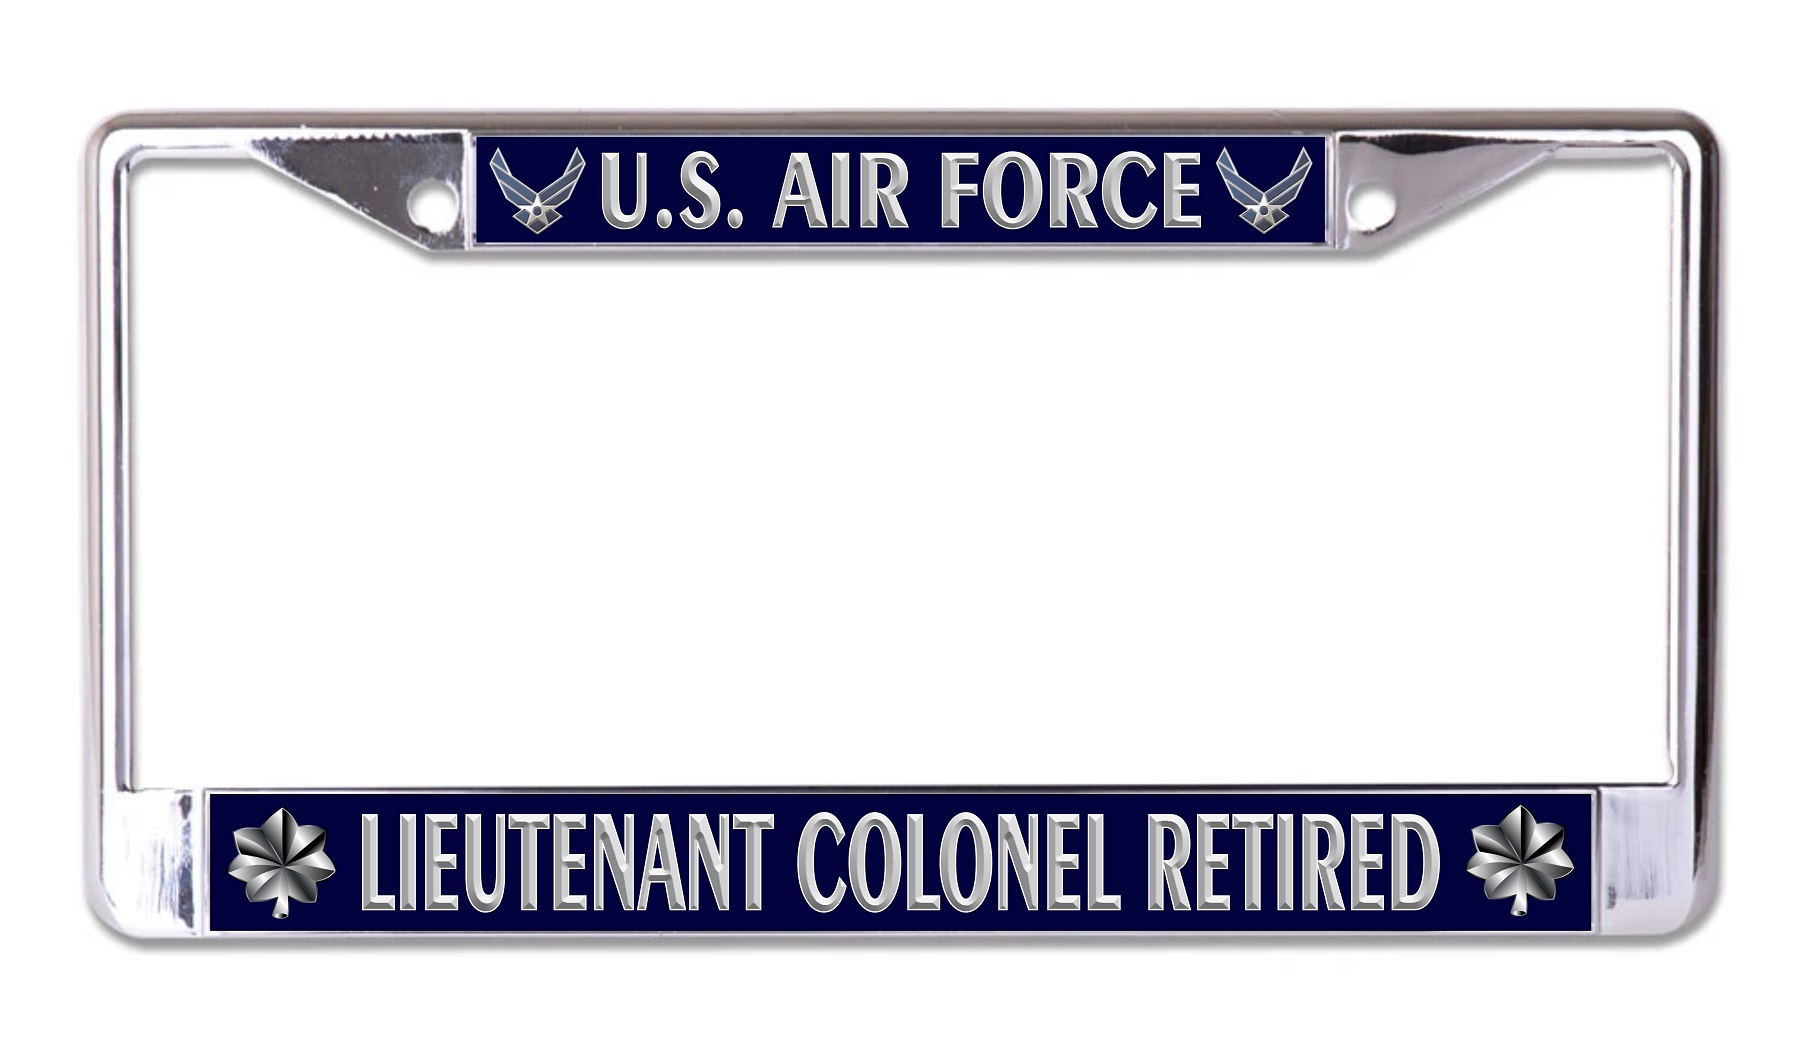 U.S. Air Force Lieutenant Colonel Retired Chrome License Plate FRAME